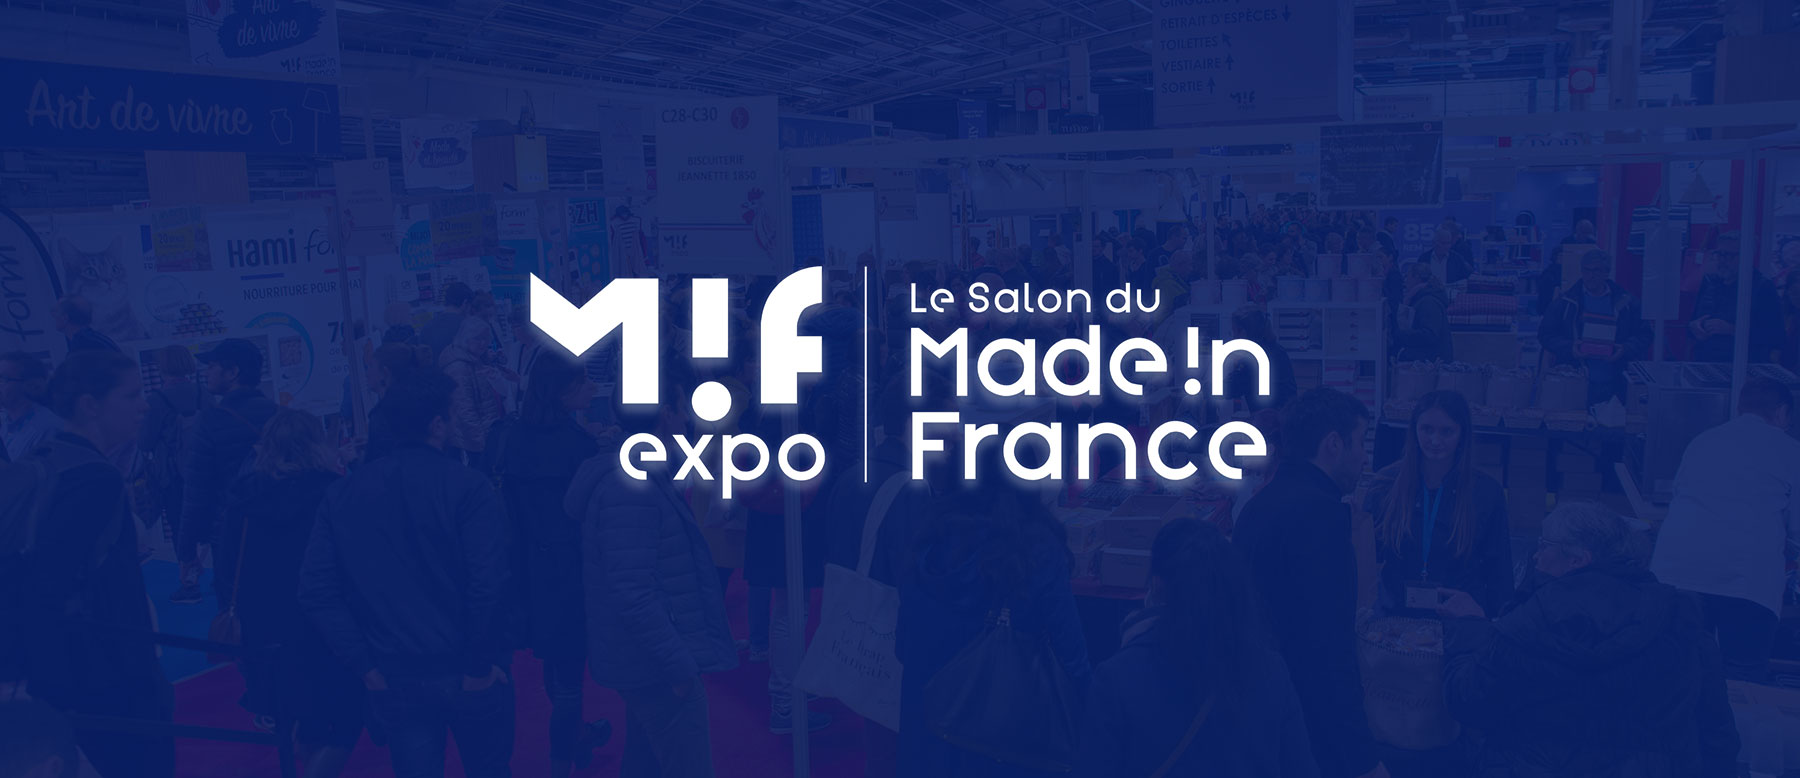 Accueil : MIFEXPO - Le salon du Made in France